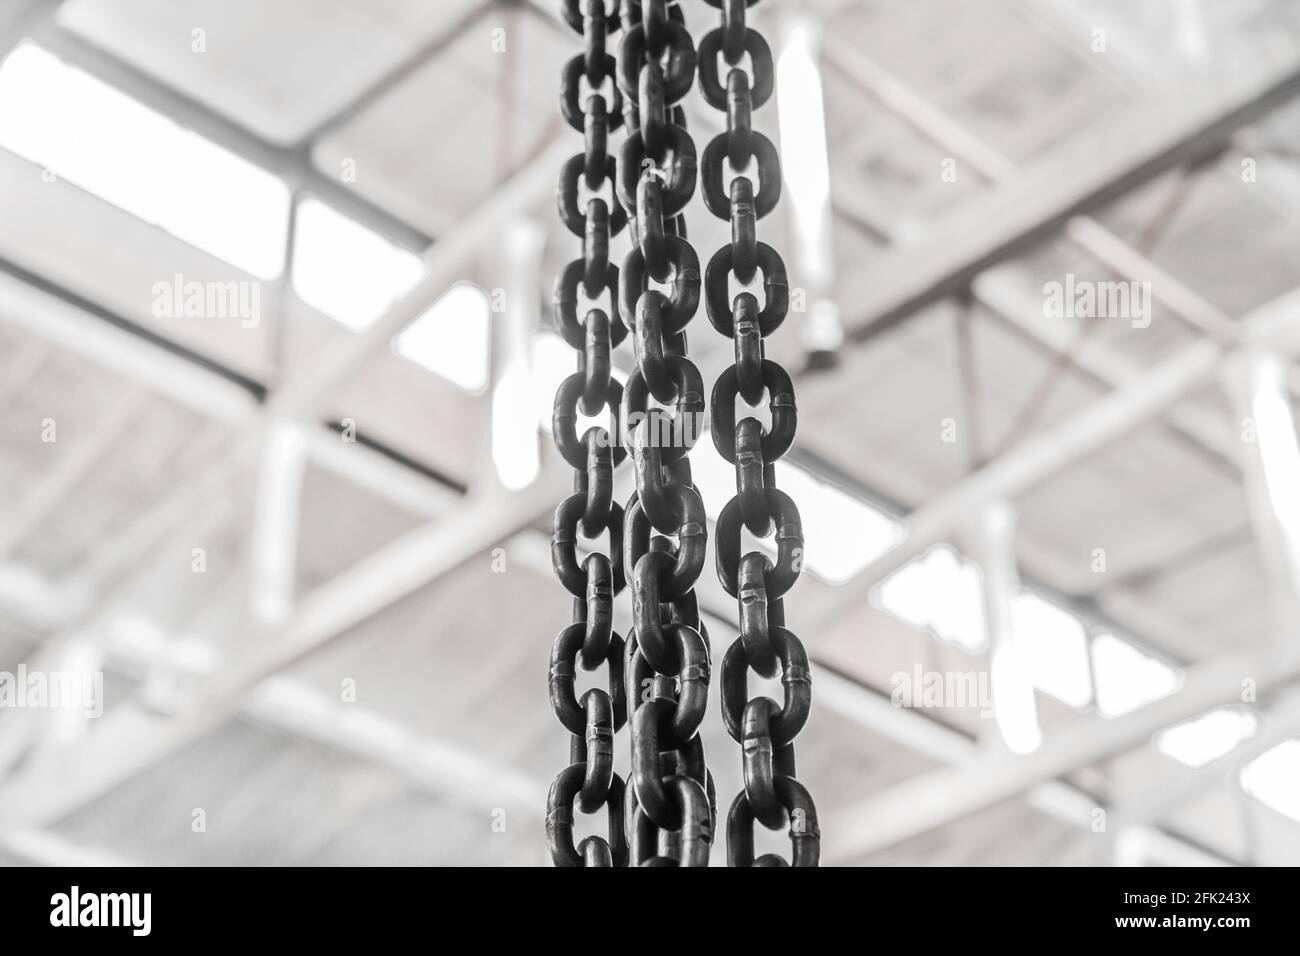 https://c8.alamy.com/comp/2FK243X/plant-equipment-chain-with-iron-links-of-the-lifting-mechanism-of-an-overhead-crane-against-the-background-of-an-industrial-workshop-or-factory-2FK243X.jpg